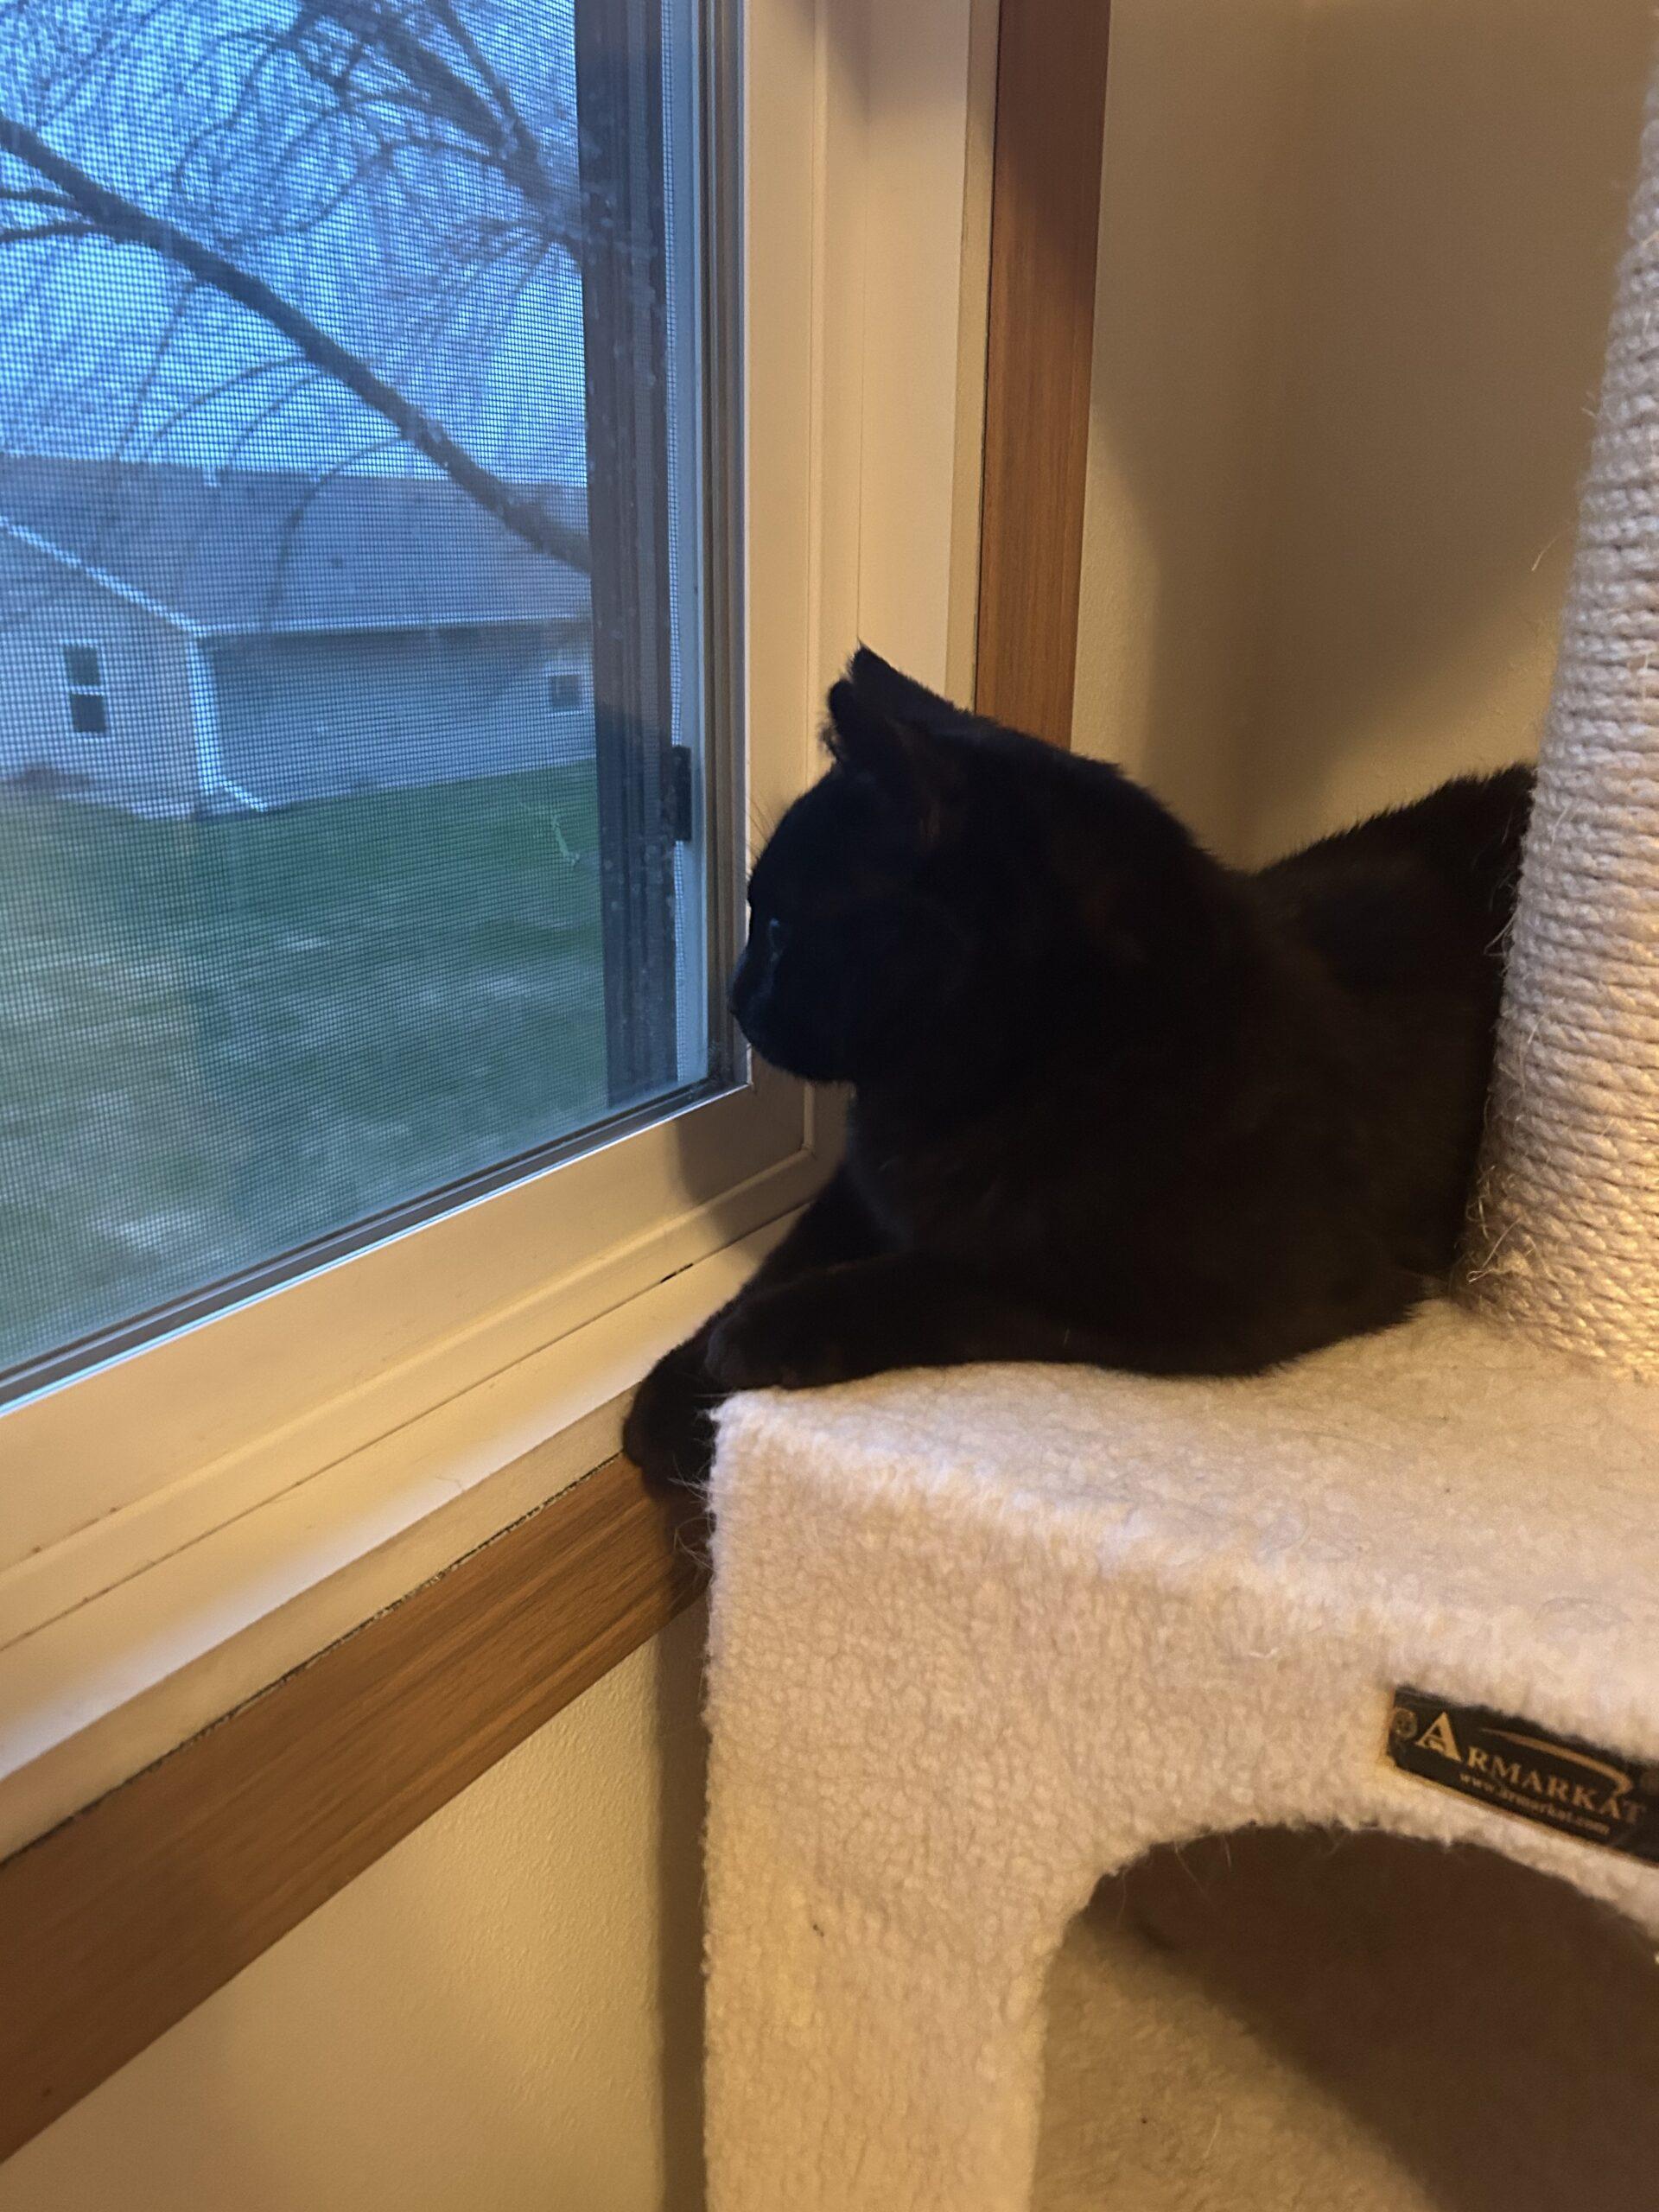 Black cat looking out window